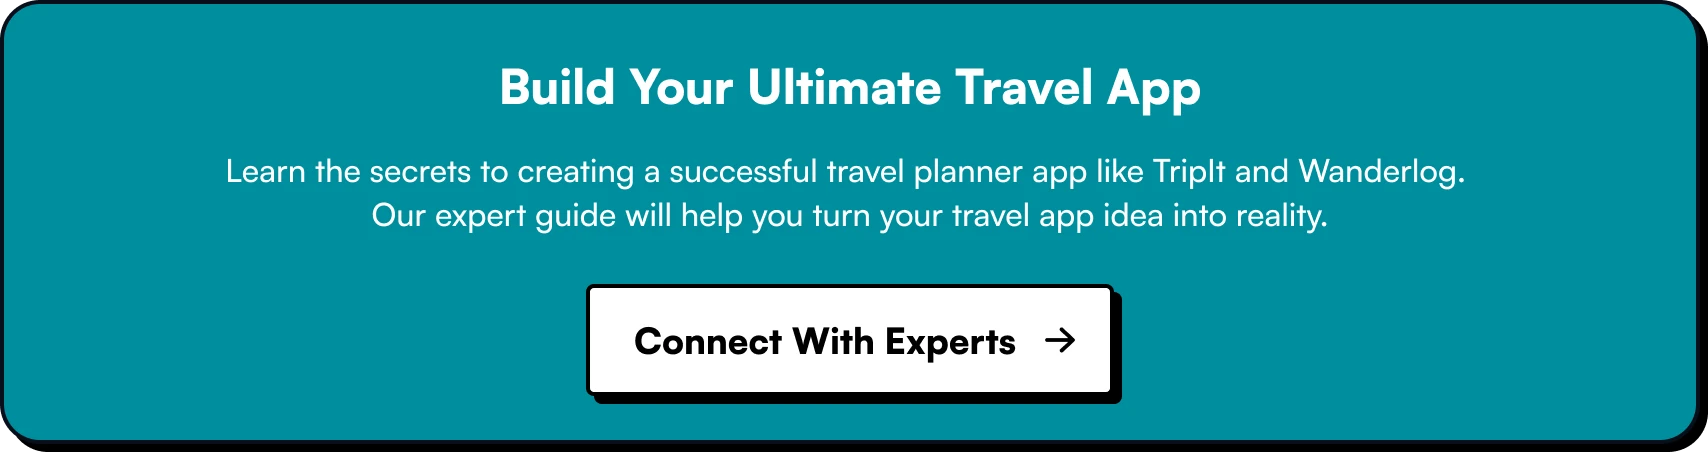 Build Your Ultimate Travel Planner App